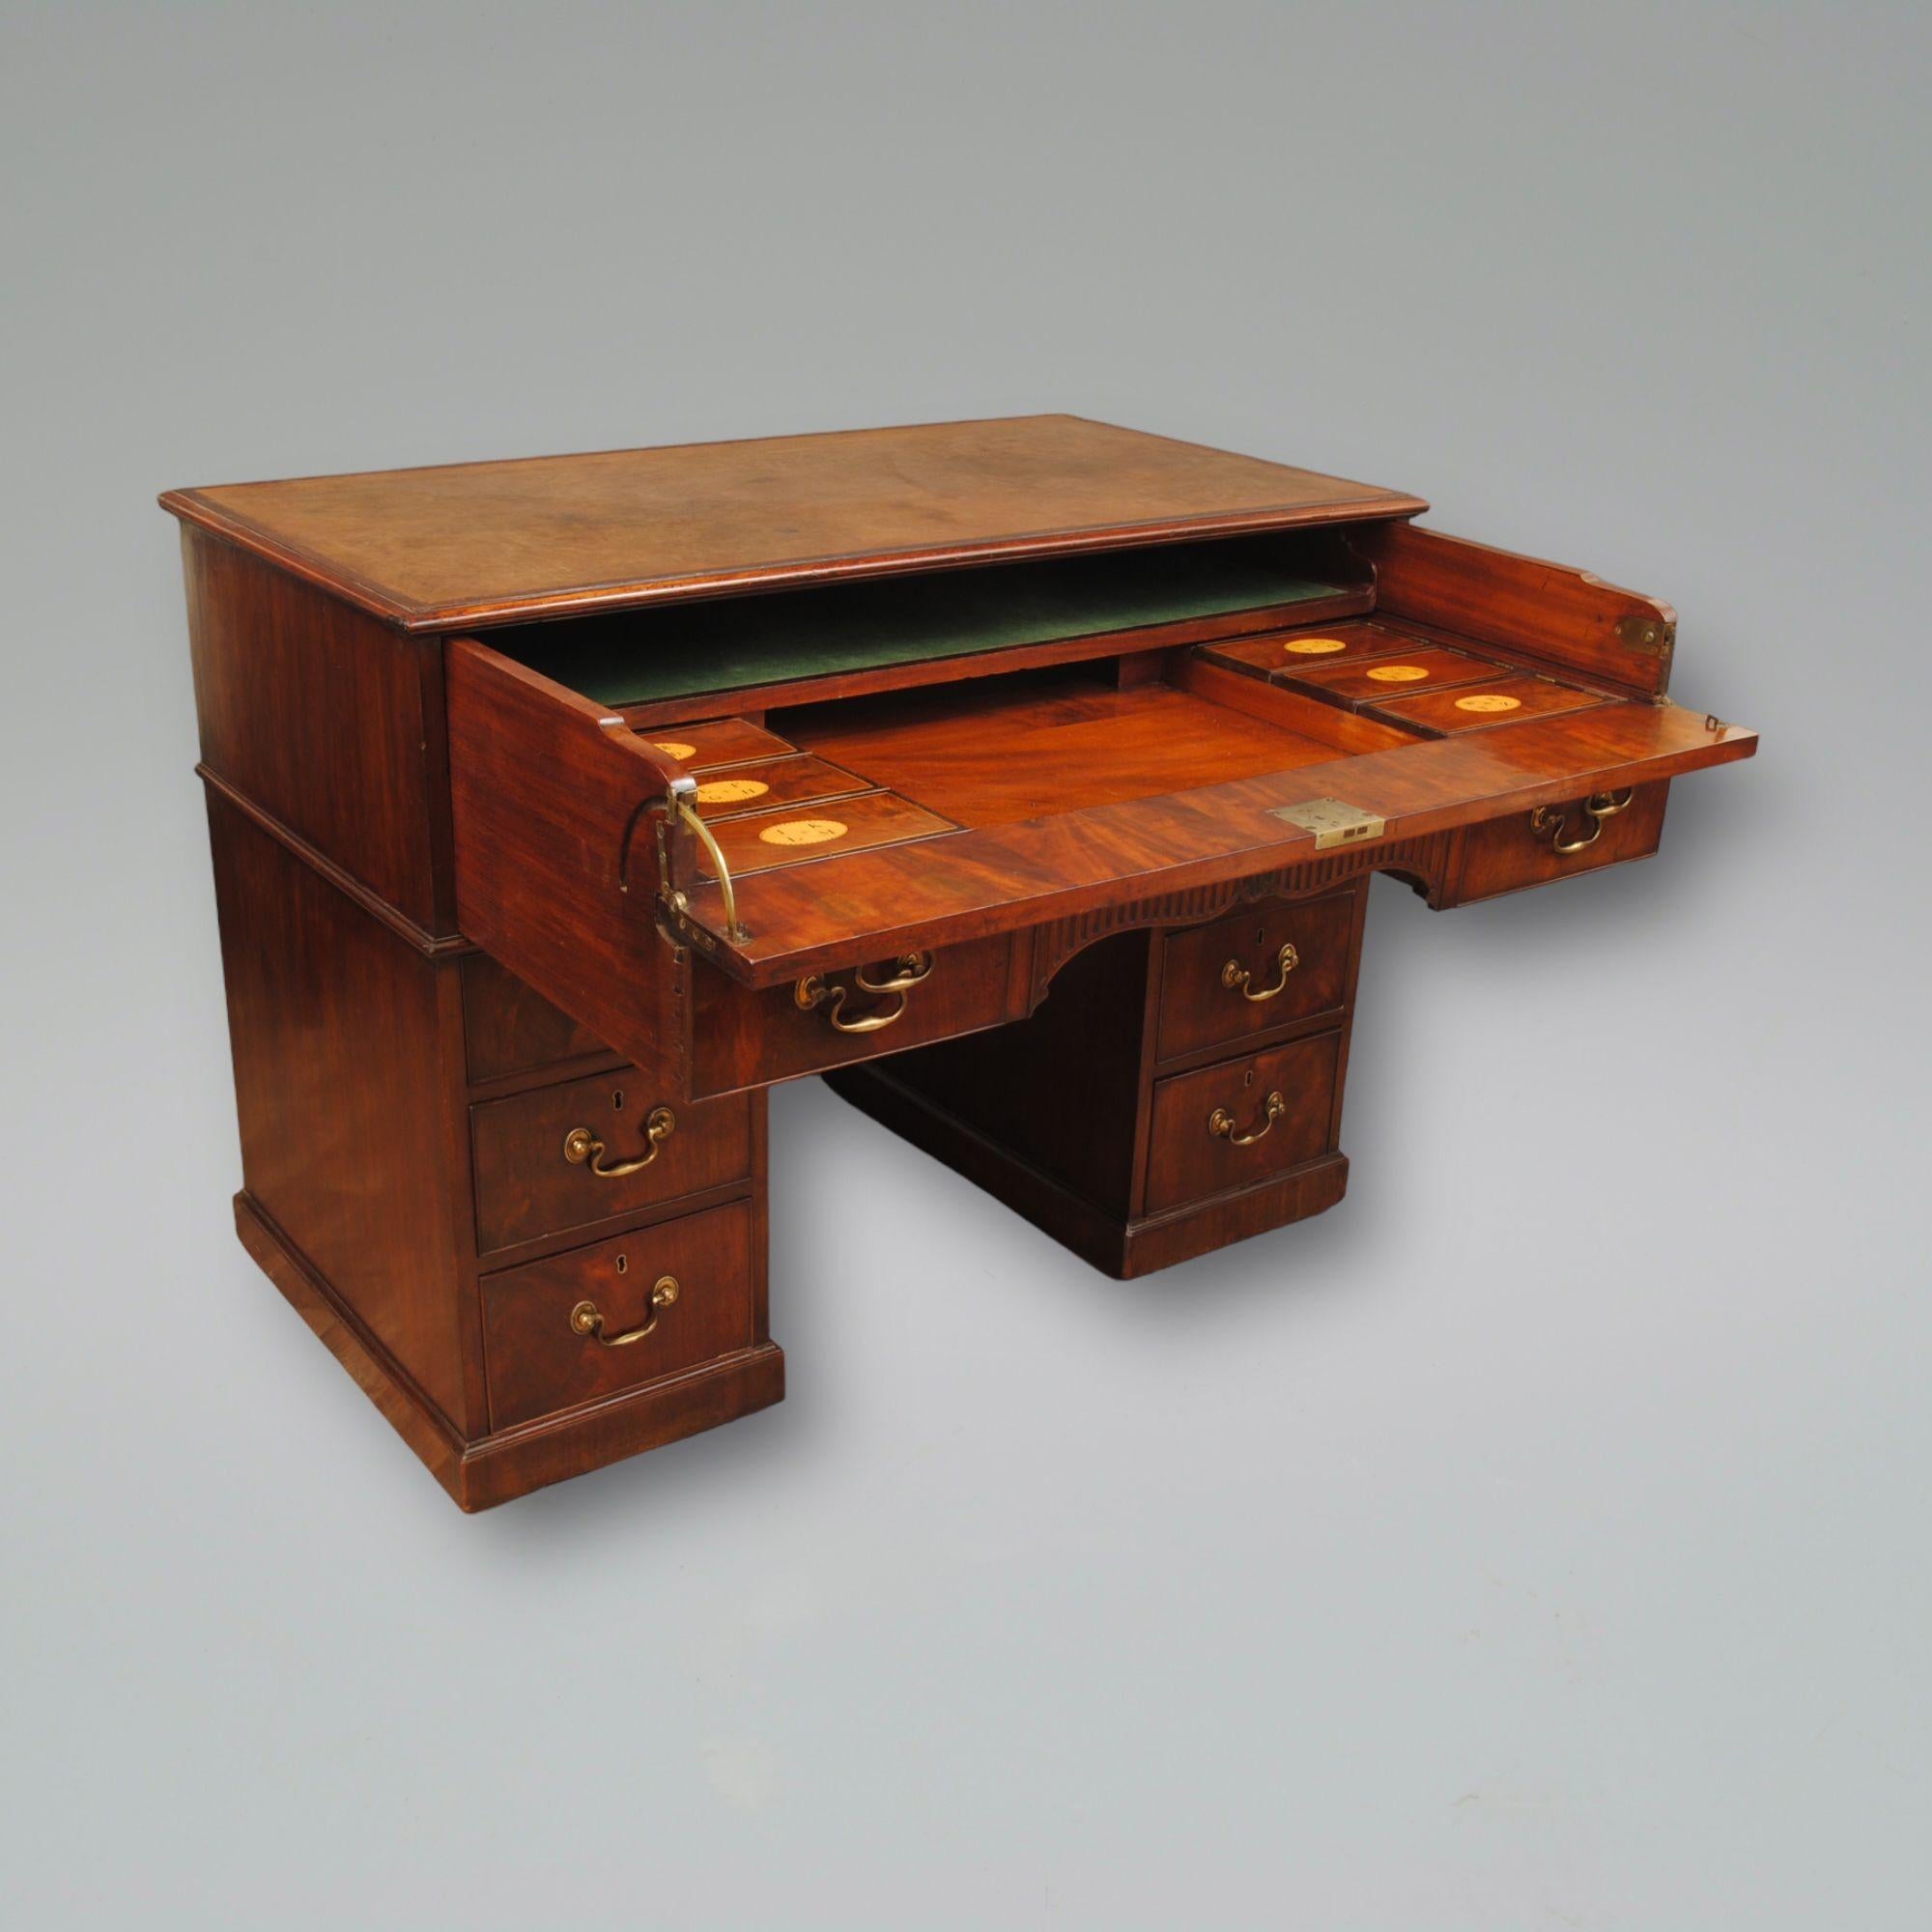 An 18th century mahogany desk or sometimes called architects desk, with fitted top drawer containing a baize lined wiring surface below which is a fitted section contains alphabet inlaid letter boxes The double top drawer slides out on hidden